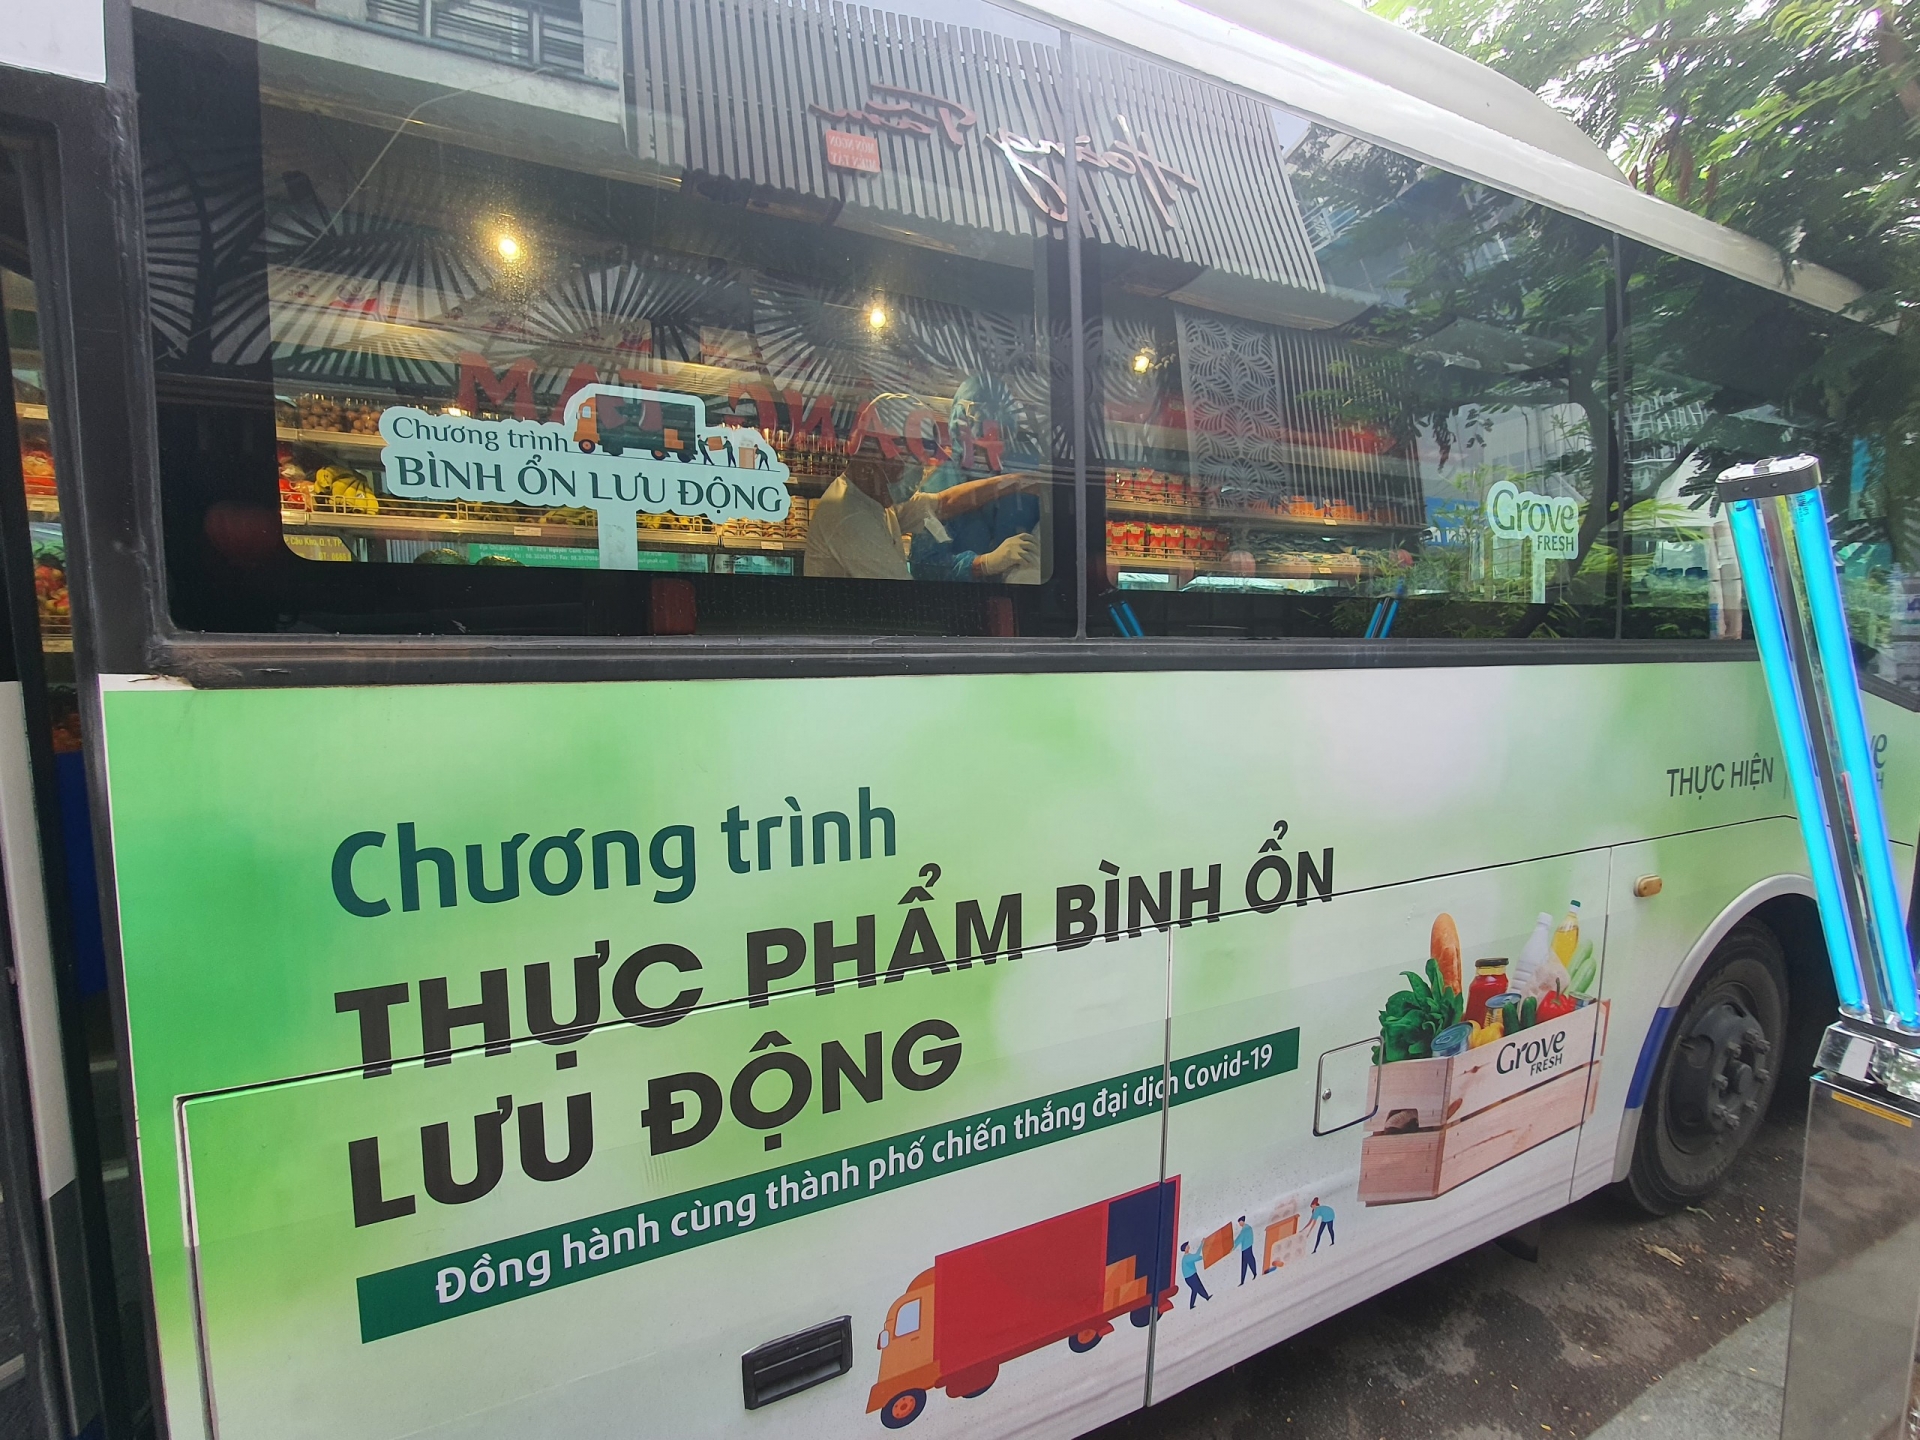 Bus converted to mini-supermarket to sell food in Ho Chi Minh City